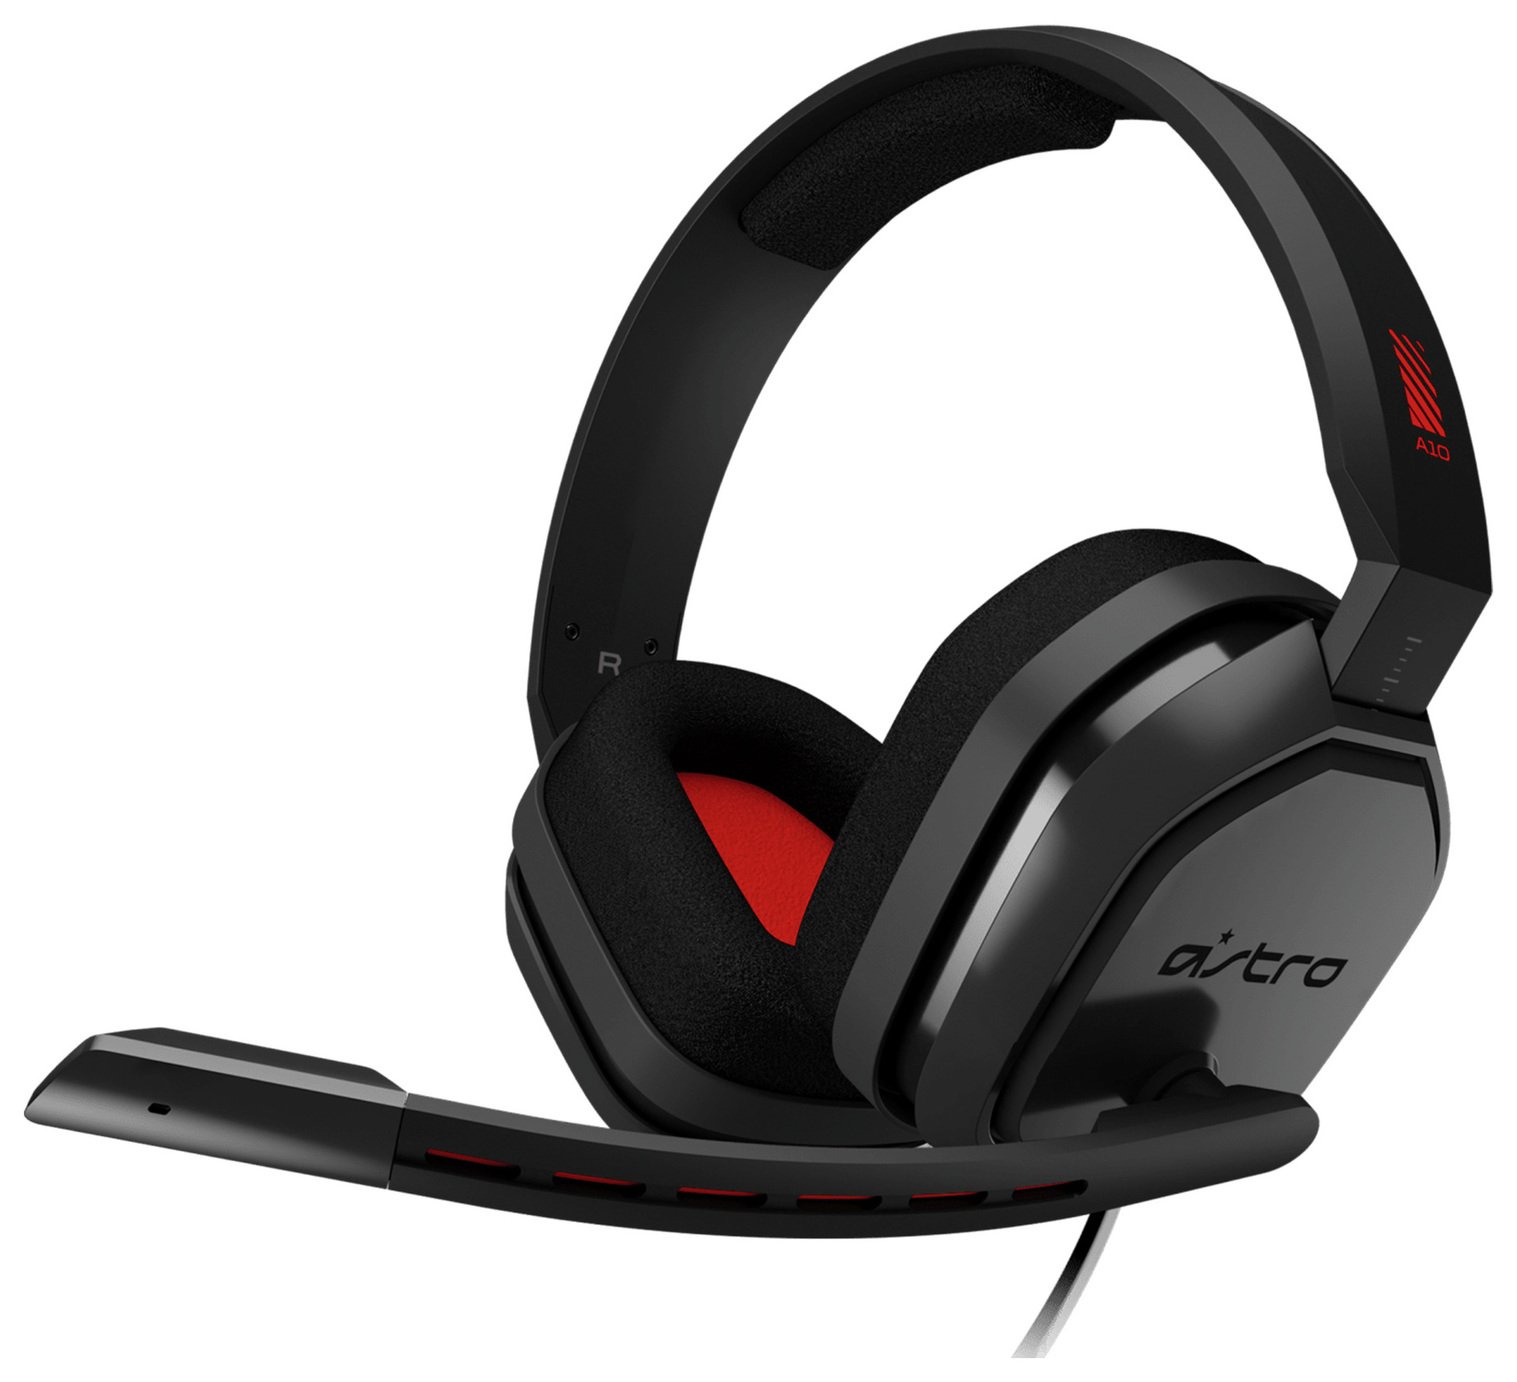 red gaming headset pc